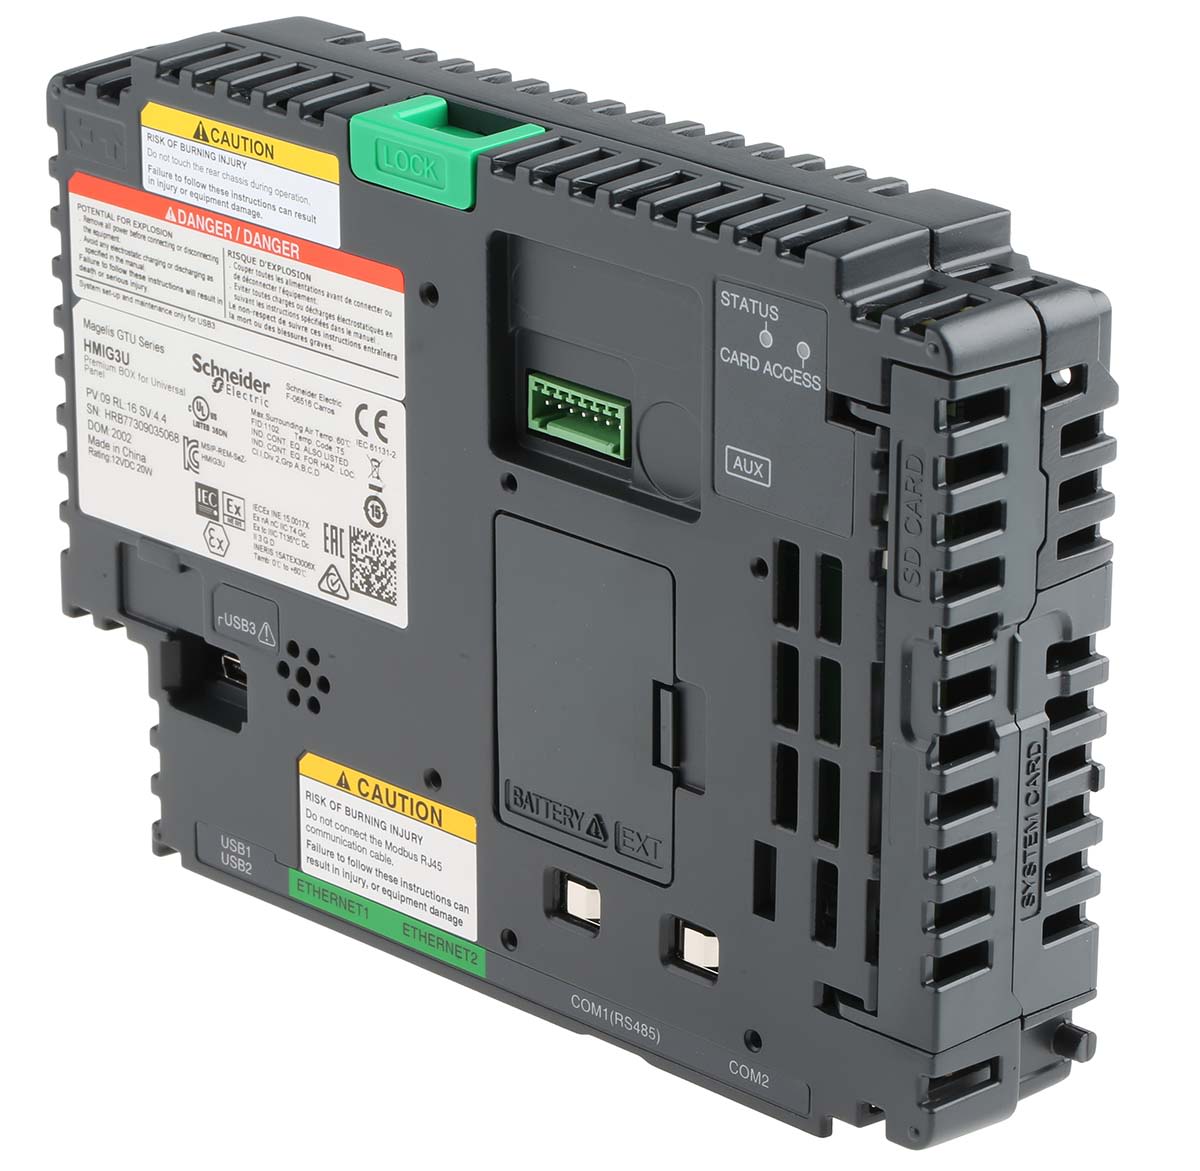 Schneider Electric Adapter For Use With HMI Magelis GTU Universal Panel